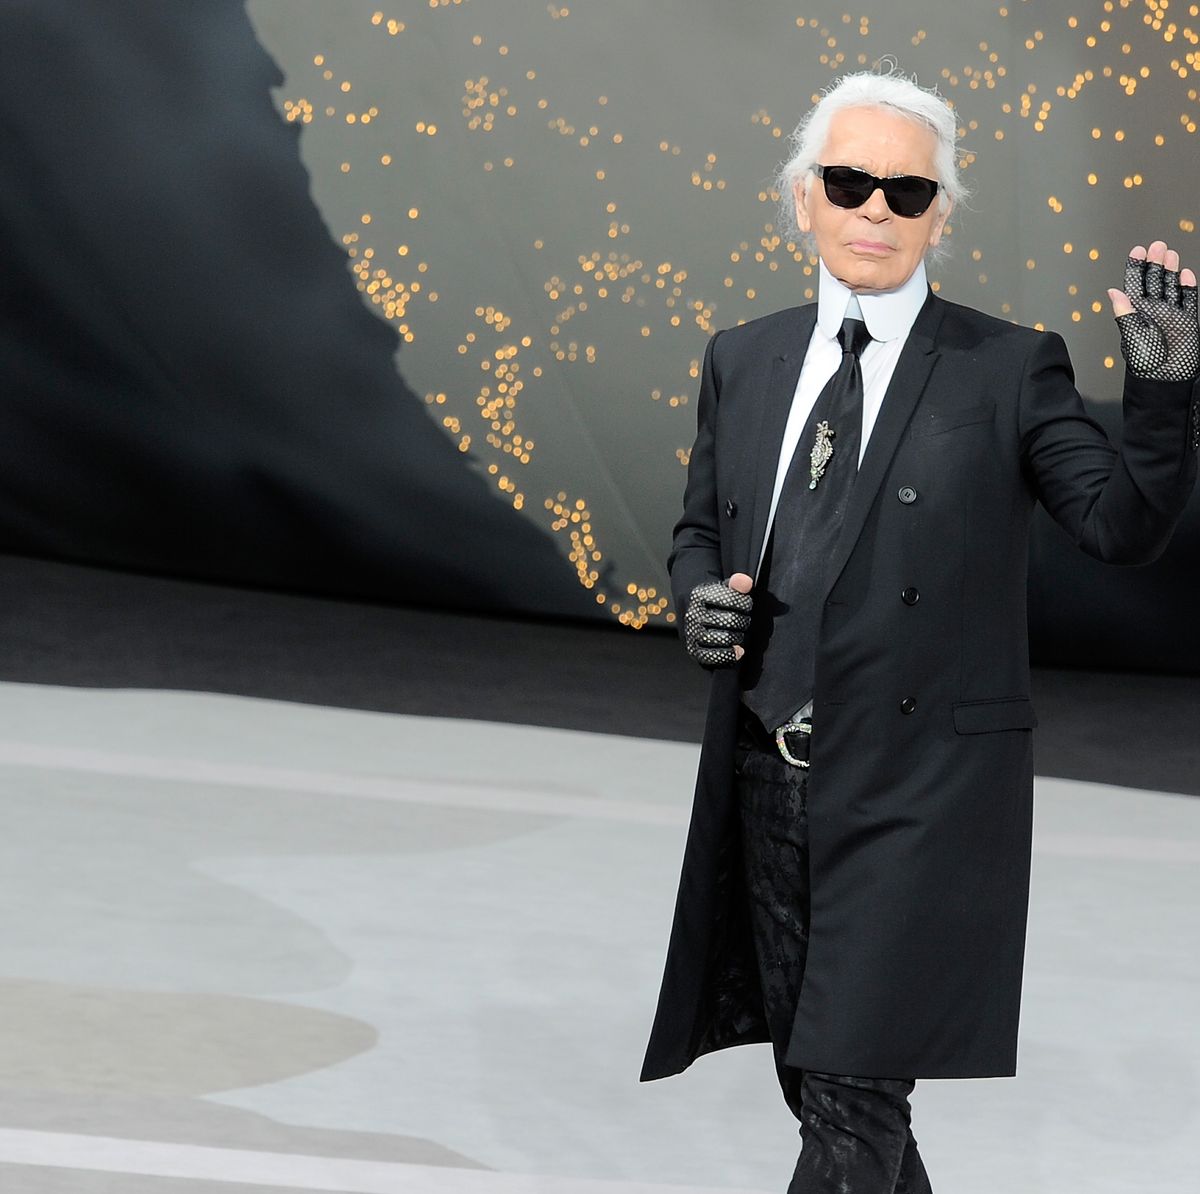 Karl Lagerfeld Quotes - Quotes from Lagerfeld, Iconic Designer for Chanel and Fendi